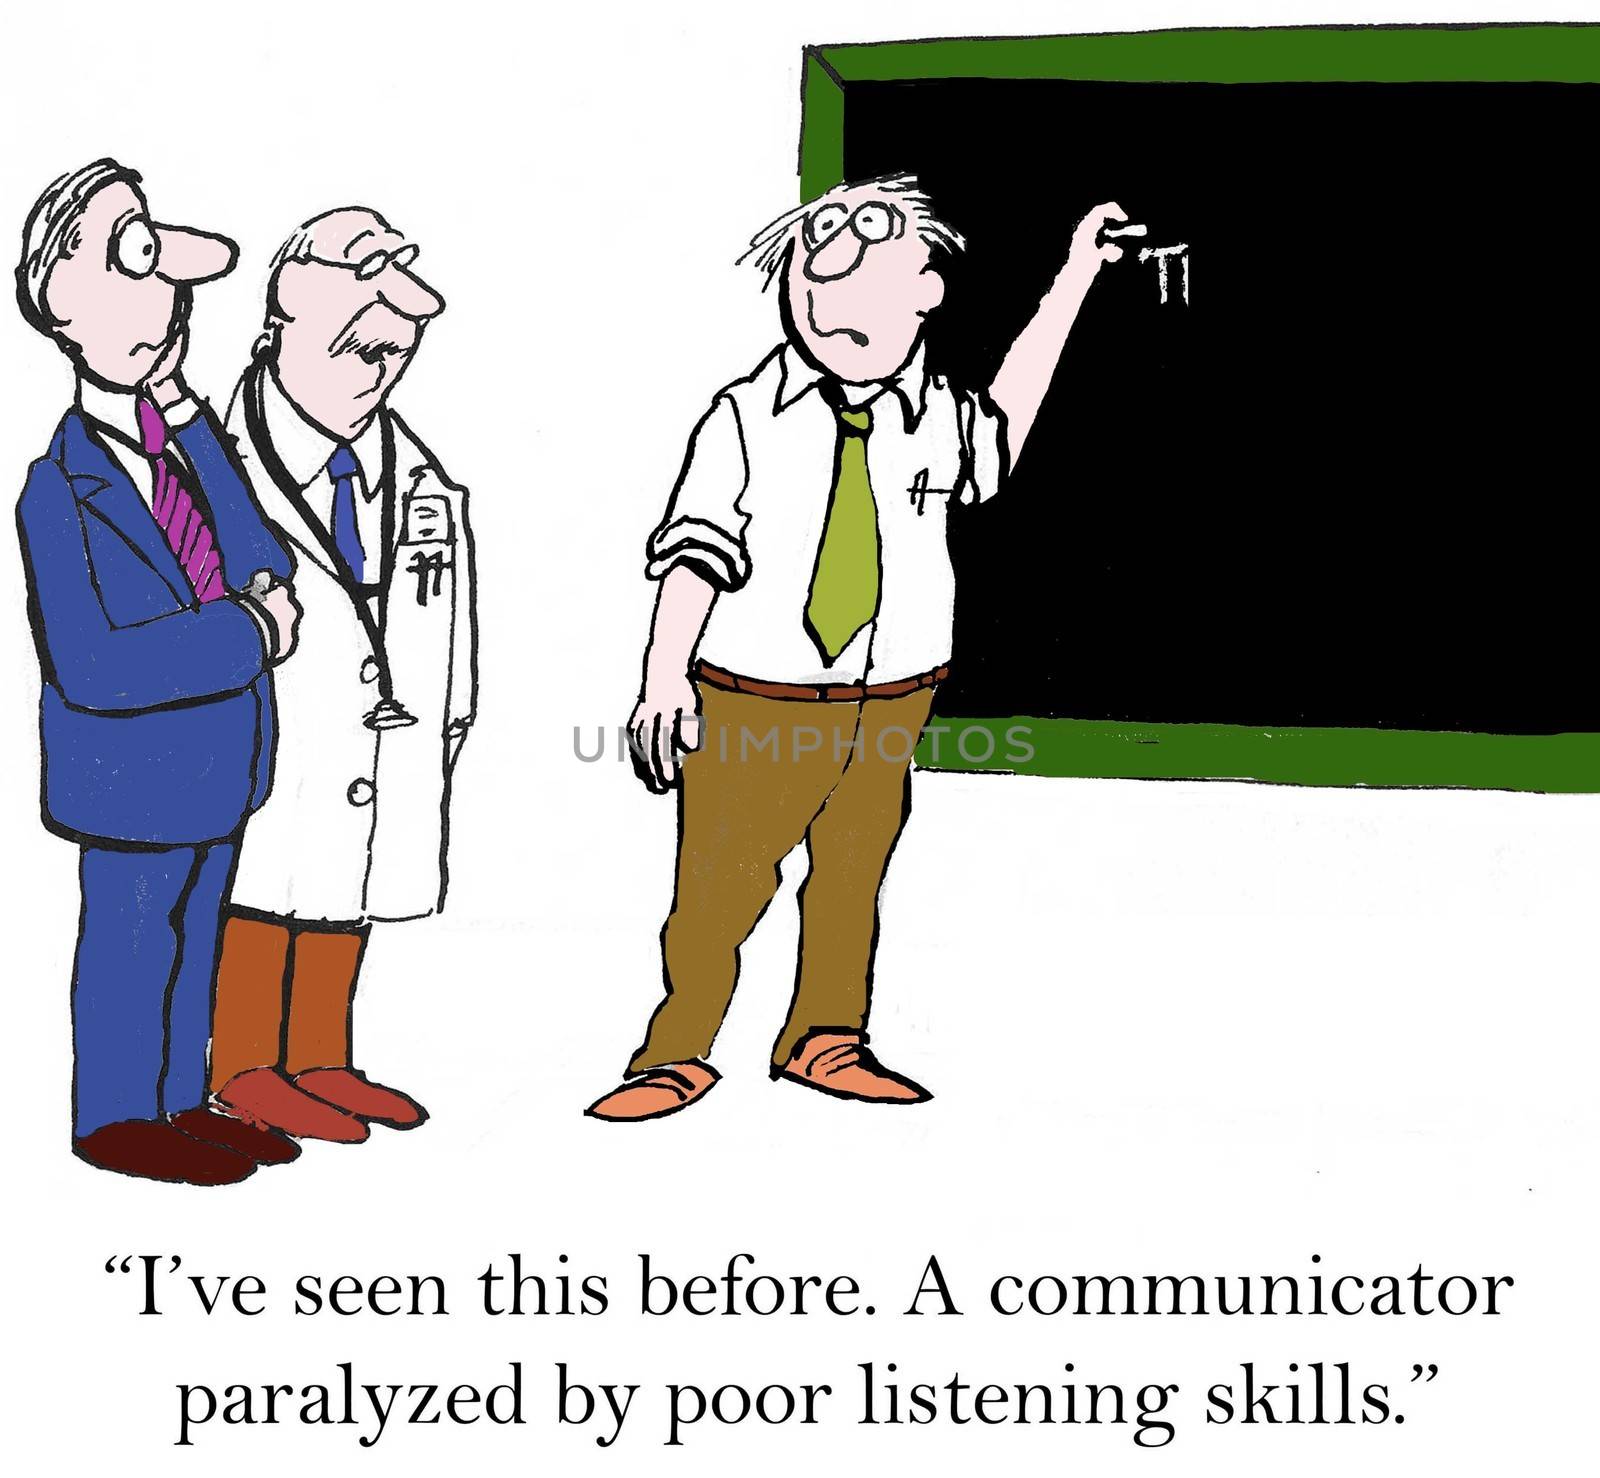 "I've seen this before. A communicator paralyzed by poor listening skills."